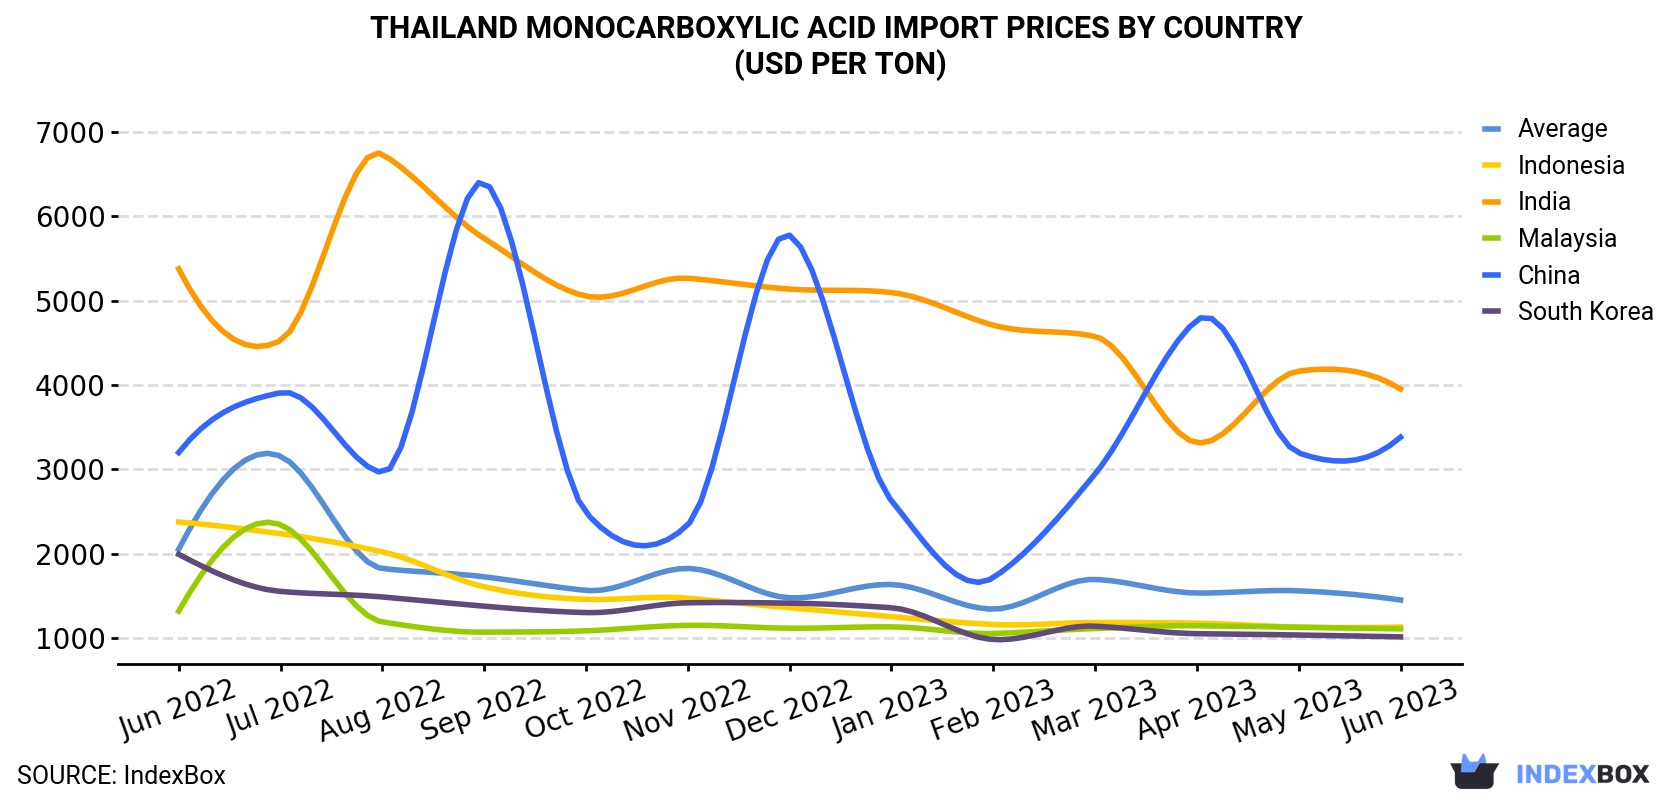 Thailand Monocarboxylic Acid Import Prices By Country (USD Per Ton)